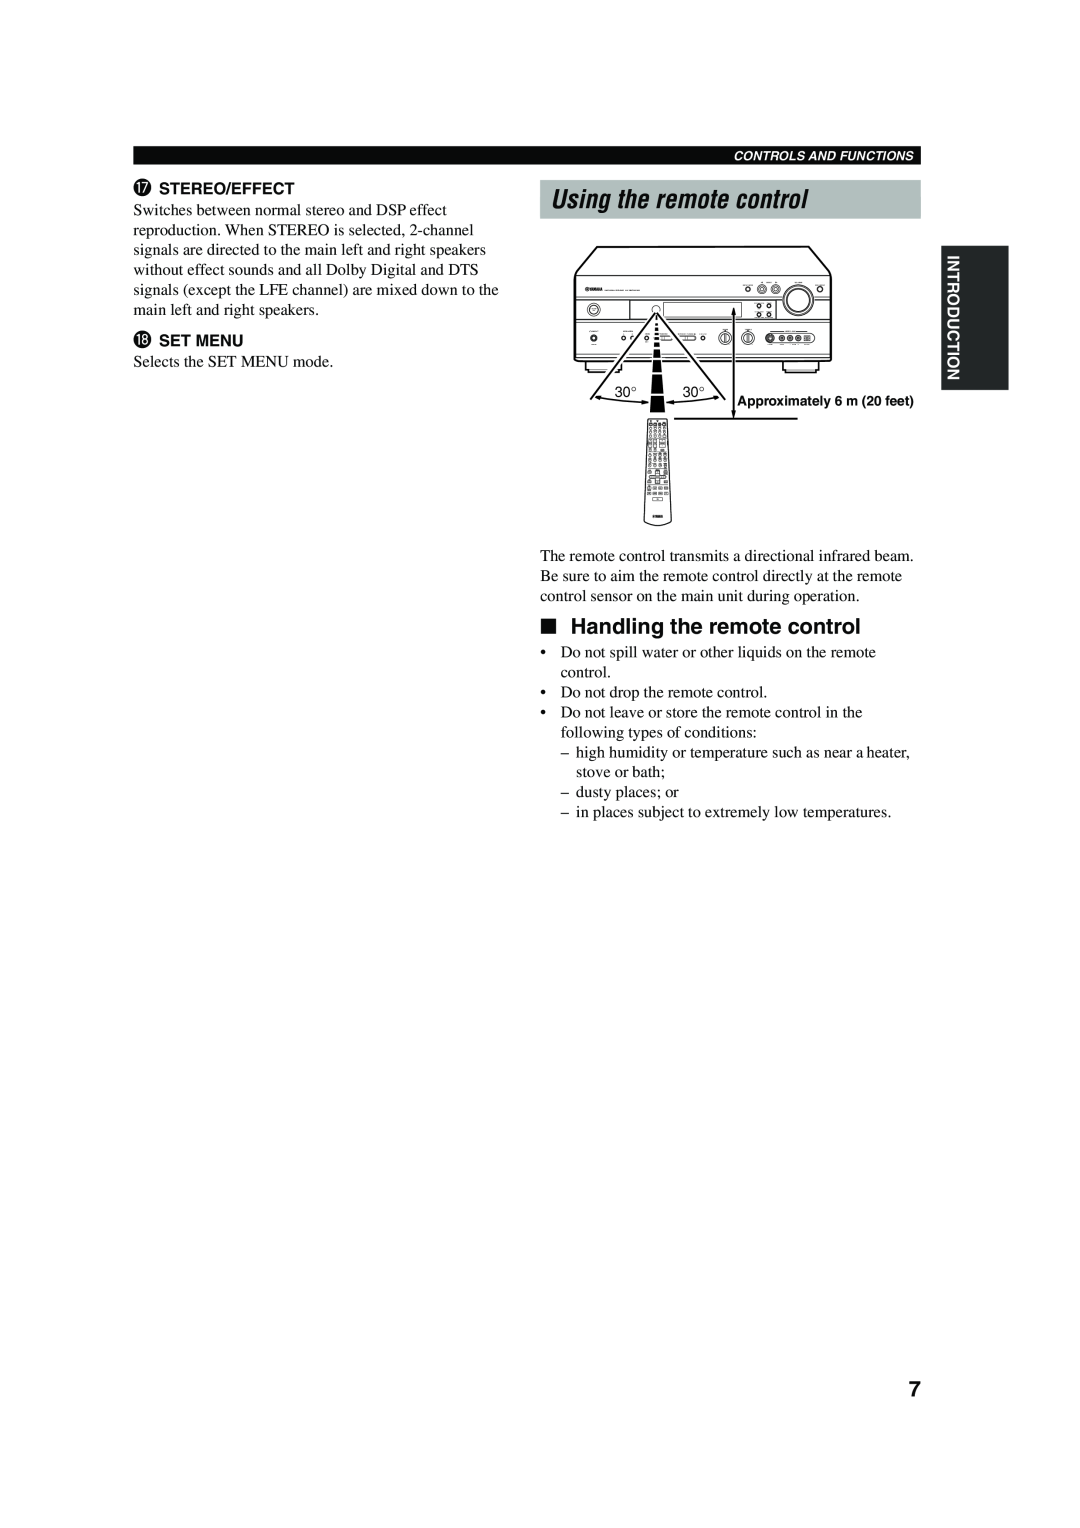 Yamaha HTR-5560 owner manual Using the remote control, Handling the remote control 